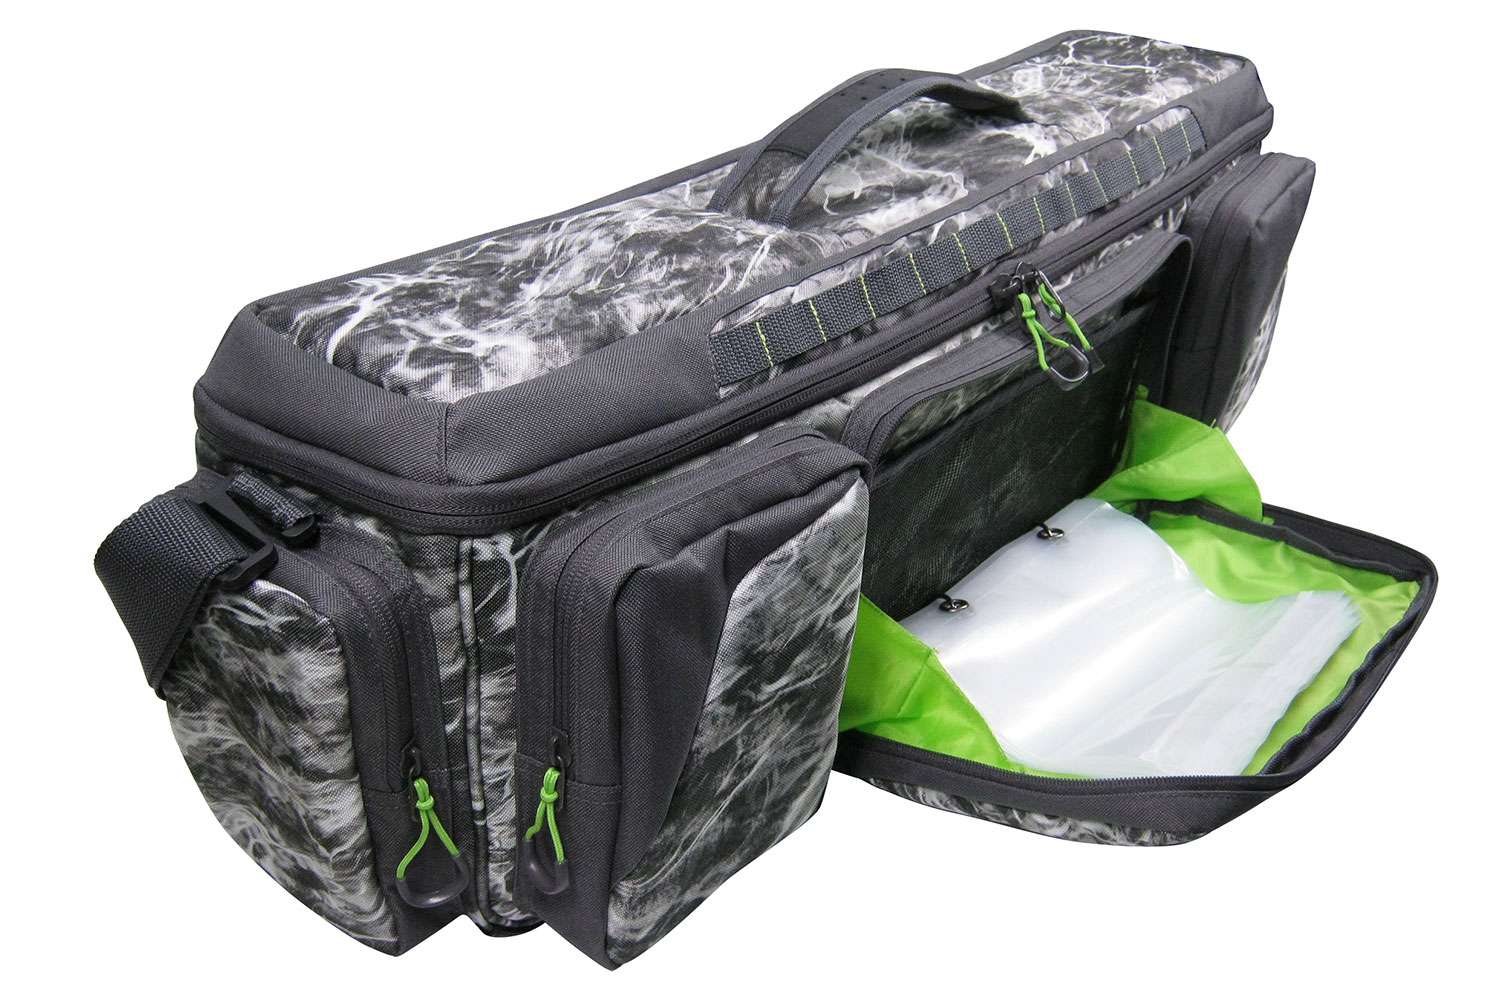     <B>Mossy Oak Large Mouth Double Tackle Backpack</B>
<BR>The tackle bag comes standard with durable 600-denier polyester, and it's built like a high-capacity, double-decker backpack. The large-mouth opening for quick access, and also features padded top-carry handle, gusseted exterior zipper pockets, padded backpack straps with sternum strap. It also has exterior EVA plier holster on side pocket, holds up to four - 3600 tackle trays in top compartment. The bottom compartment tray storage holds up to three trays and come with three trays. The bag measures: 18 x 16 x 7 1/2 inches.
<BR>
<B>MSRP: $89.99</B>